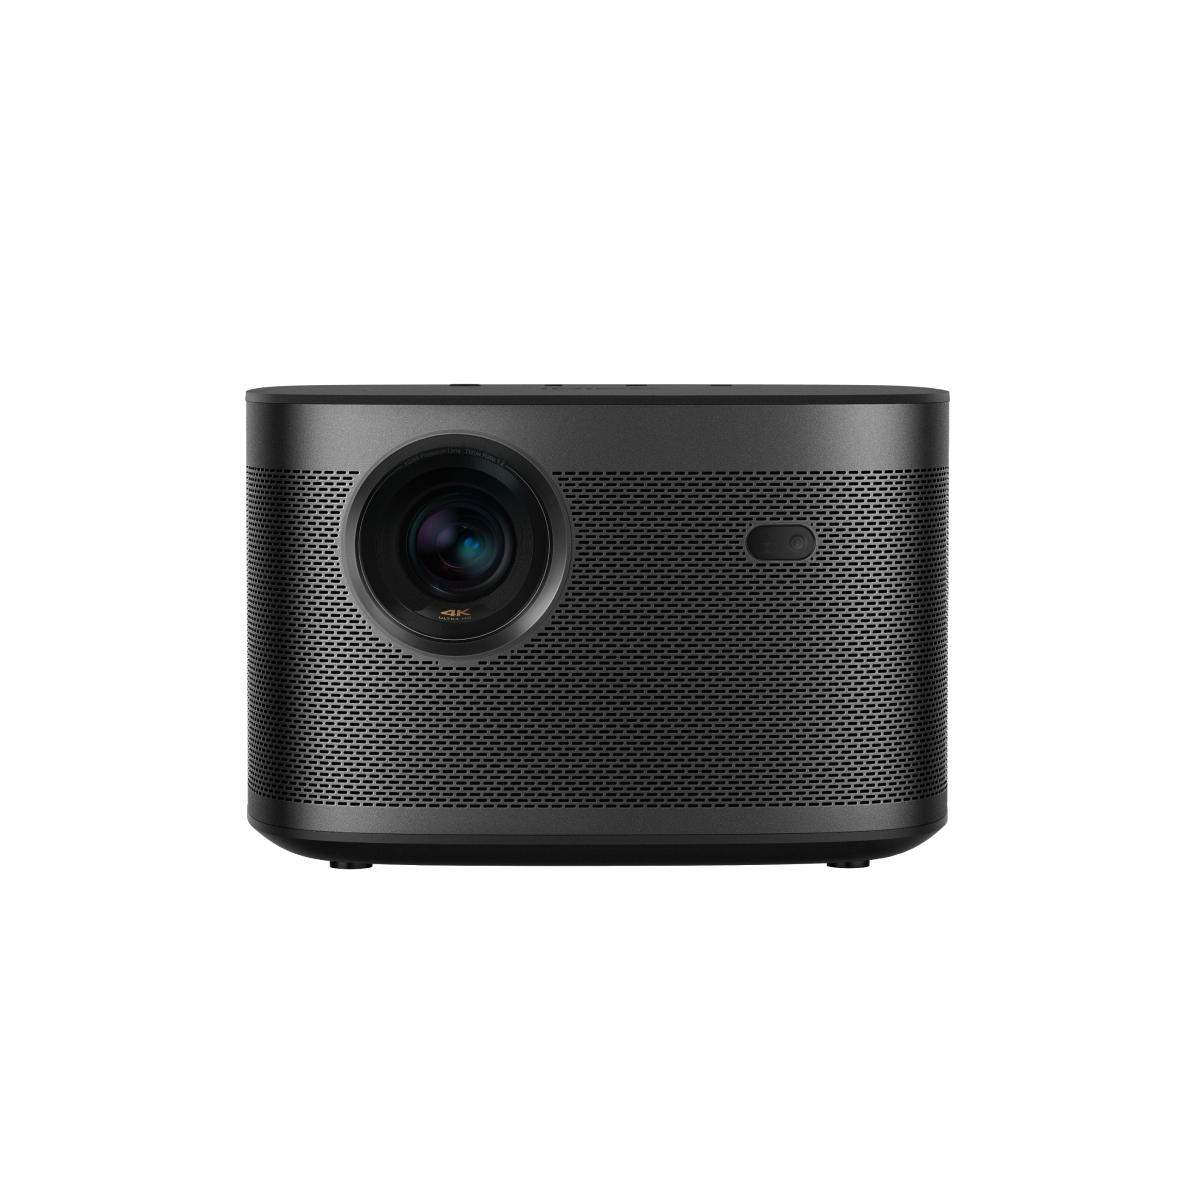 Connect a Chromecast to a Video Projector